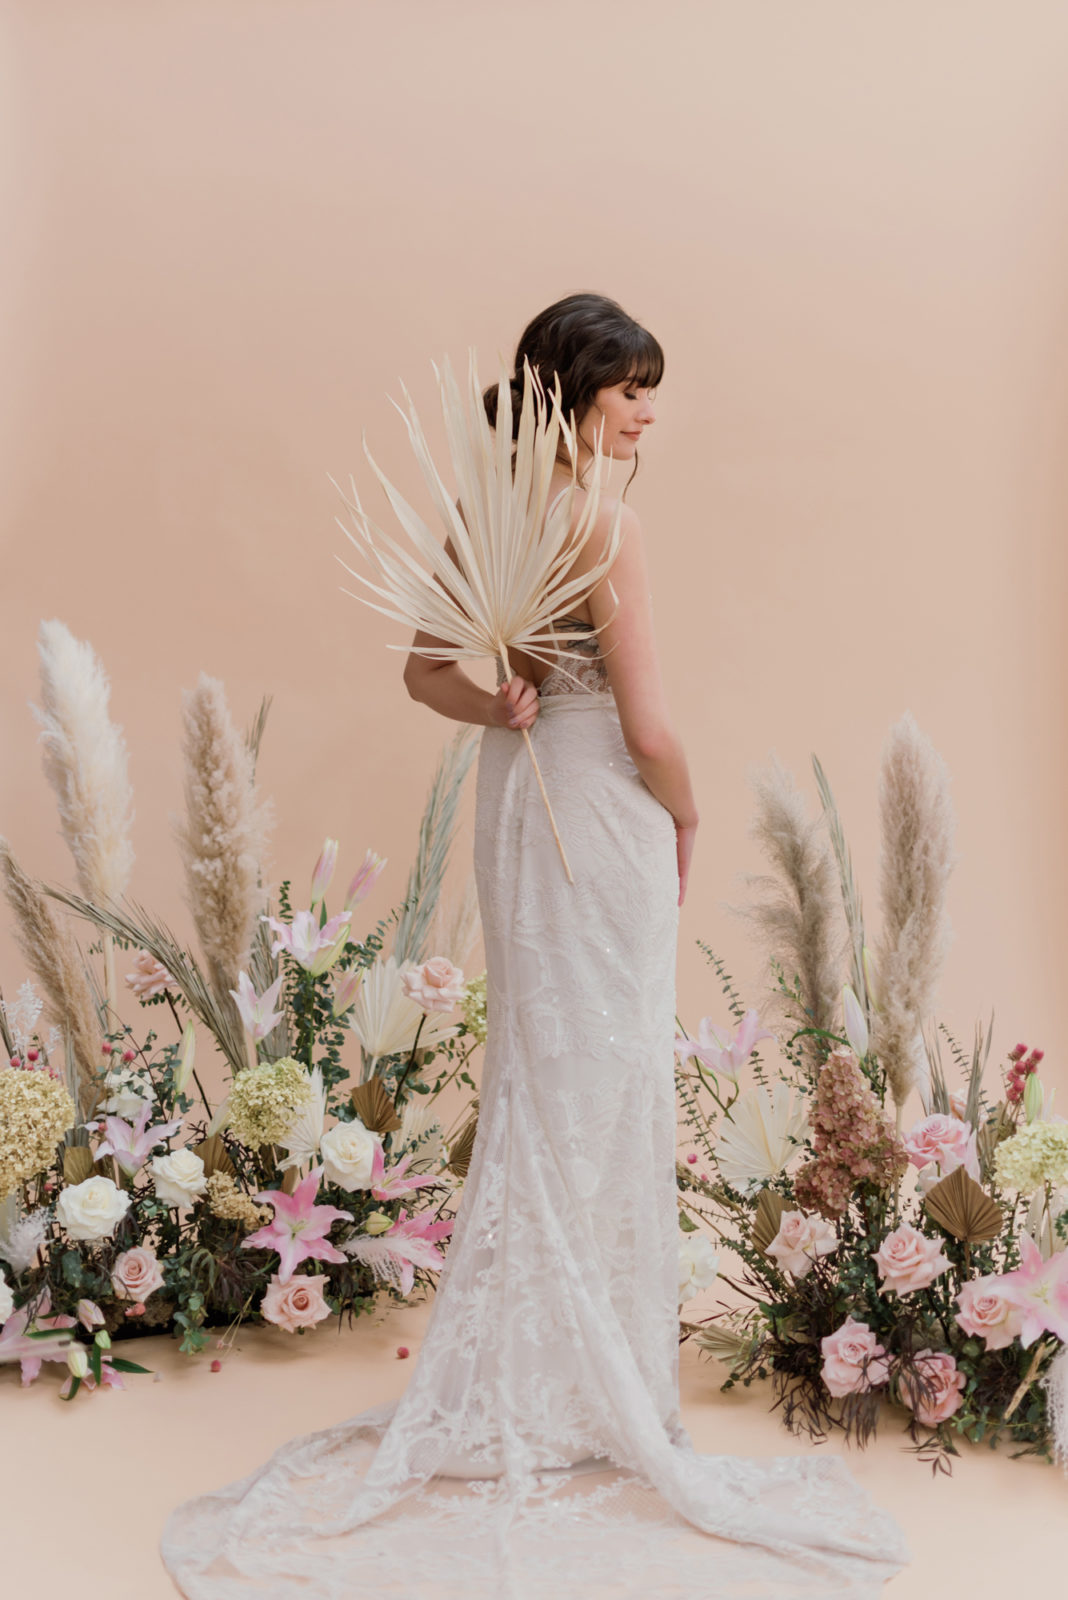 Model poses holding a palm frond behind her back for this renaissance inspired bridal editorial